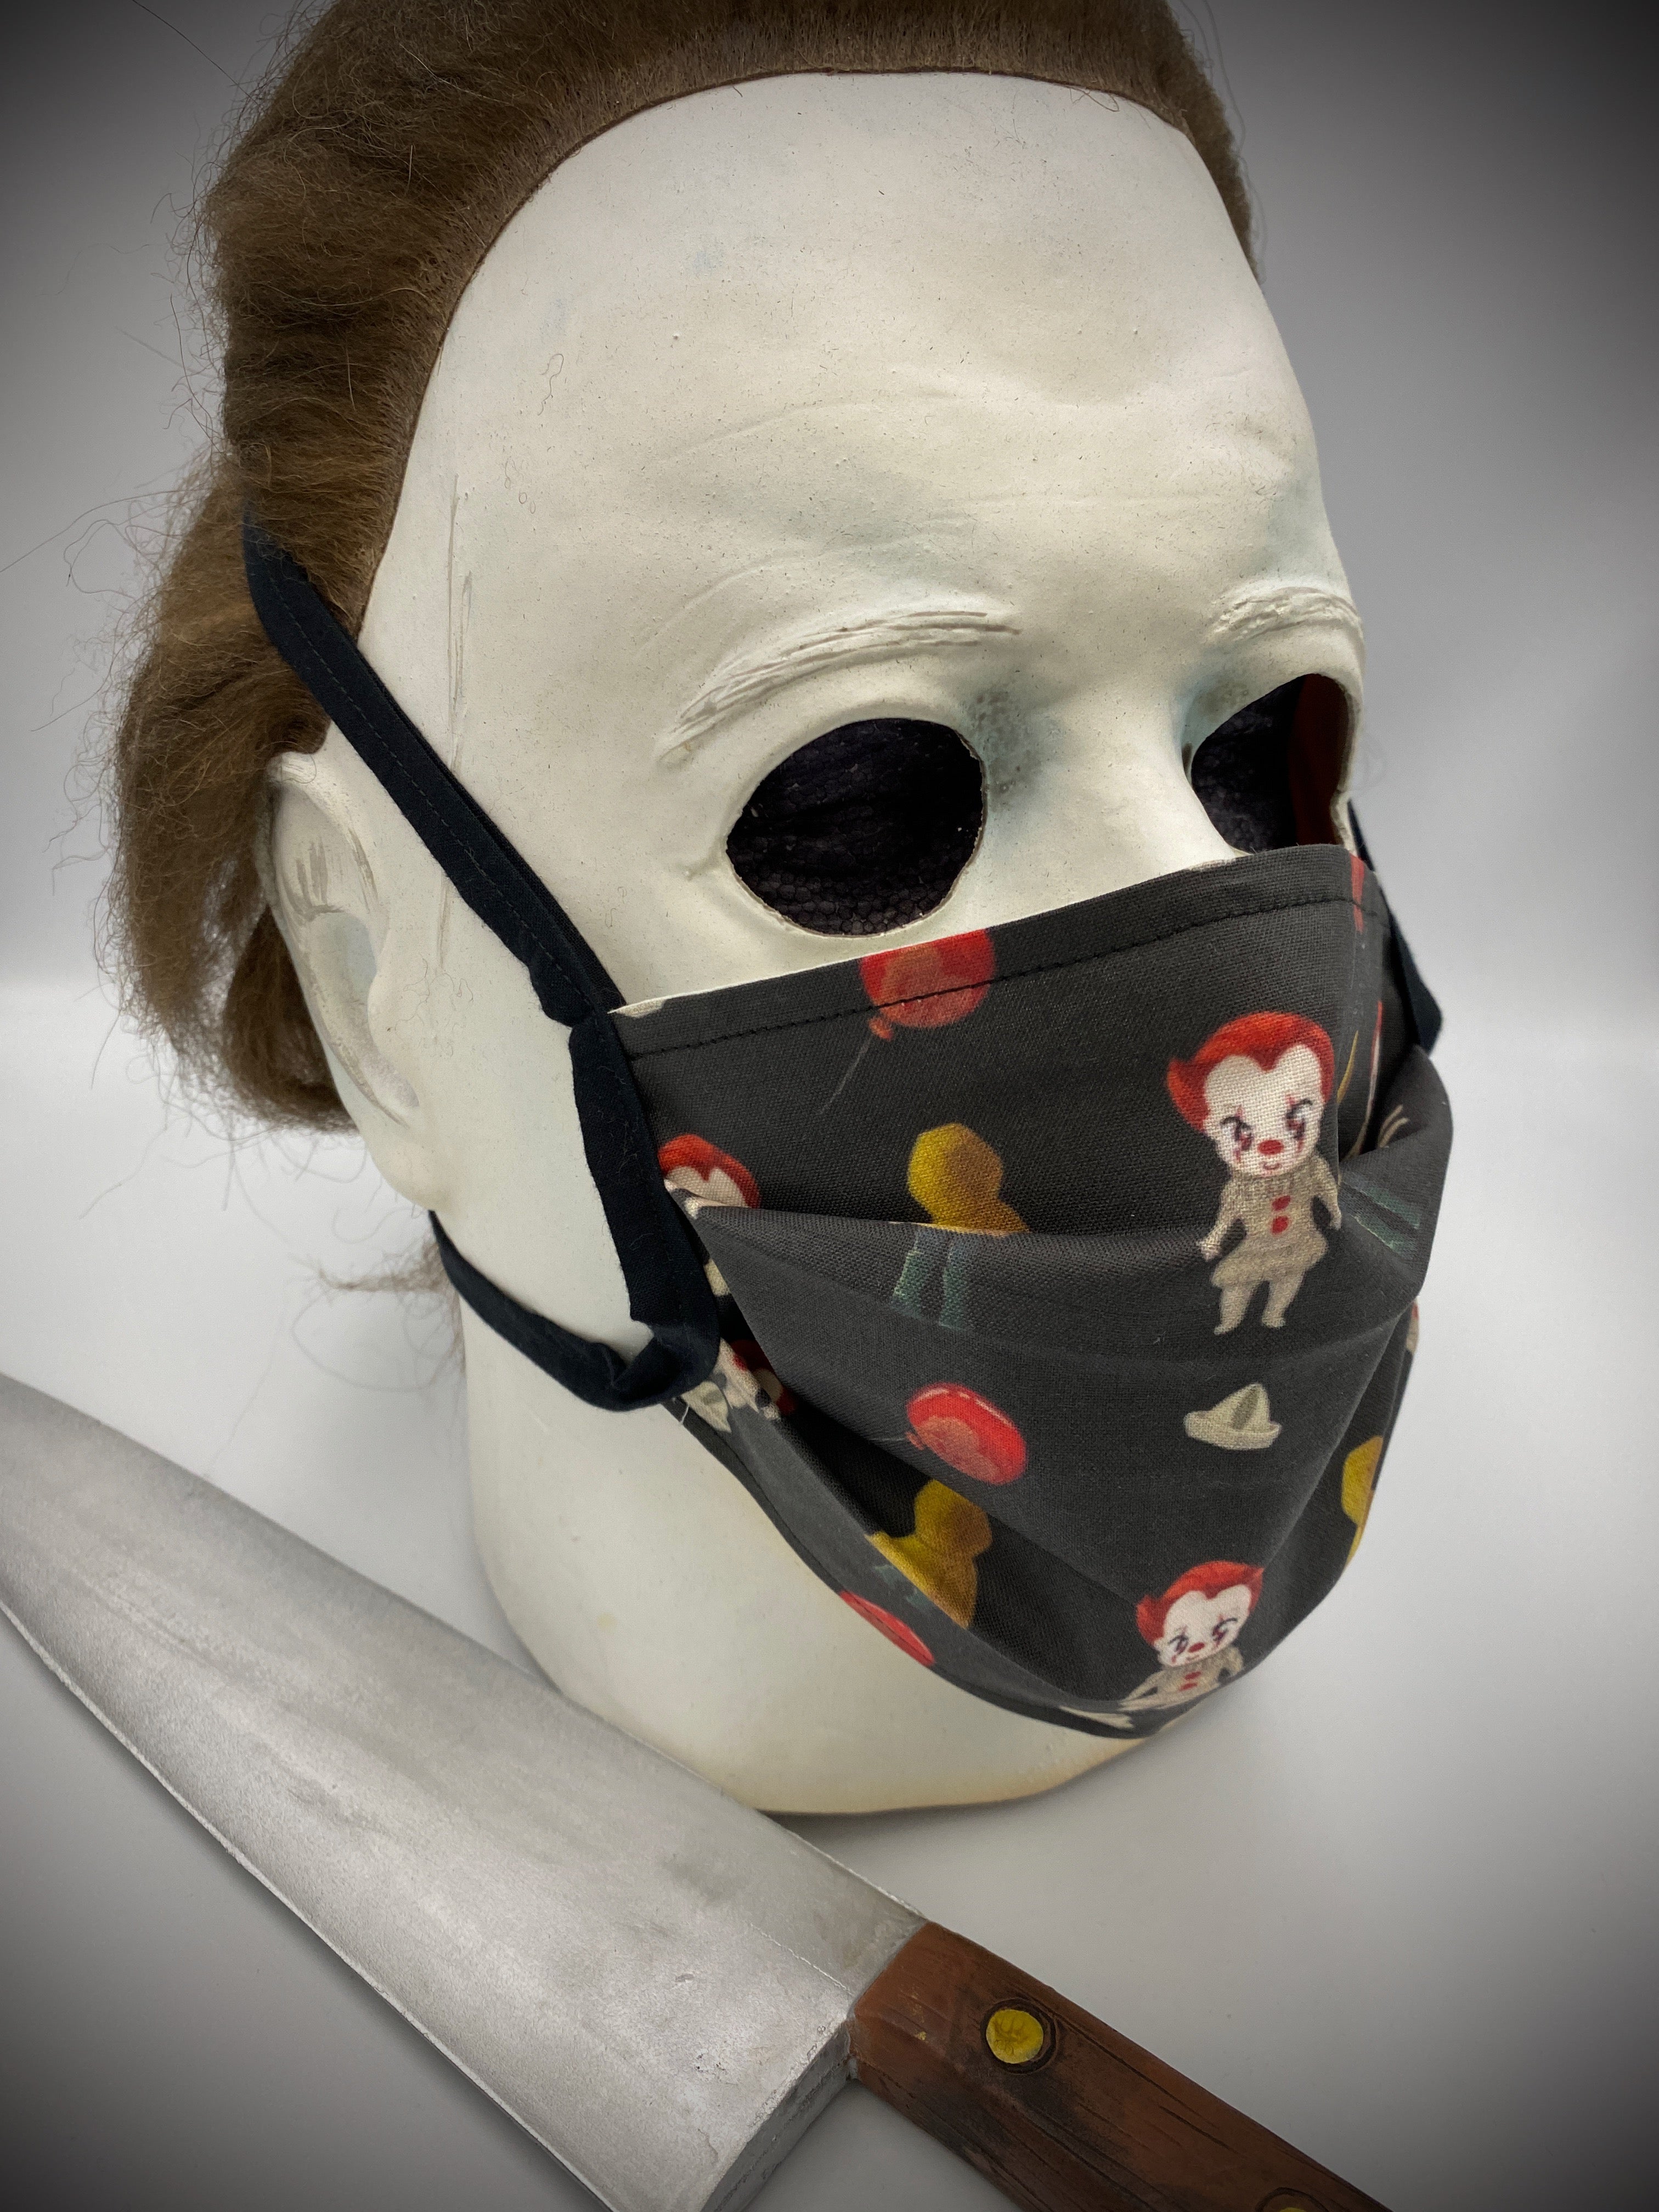 This is a black protective face mask with black ties and it is Pennywise from It 2017 and has white boats, red balloons and Georgie wearing a yellow rain coat, worn by Michael Myers.